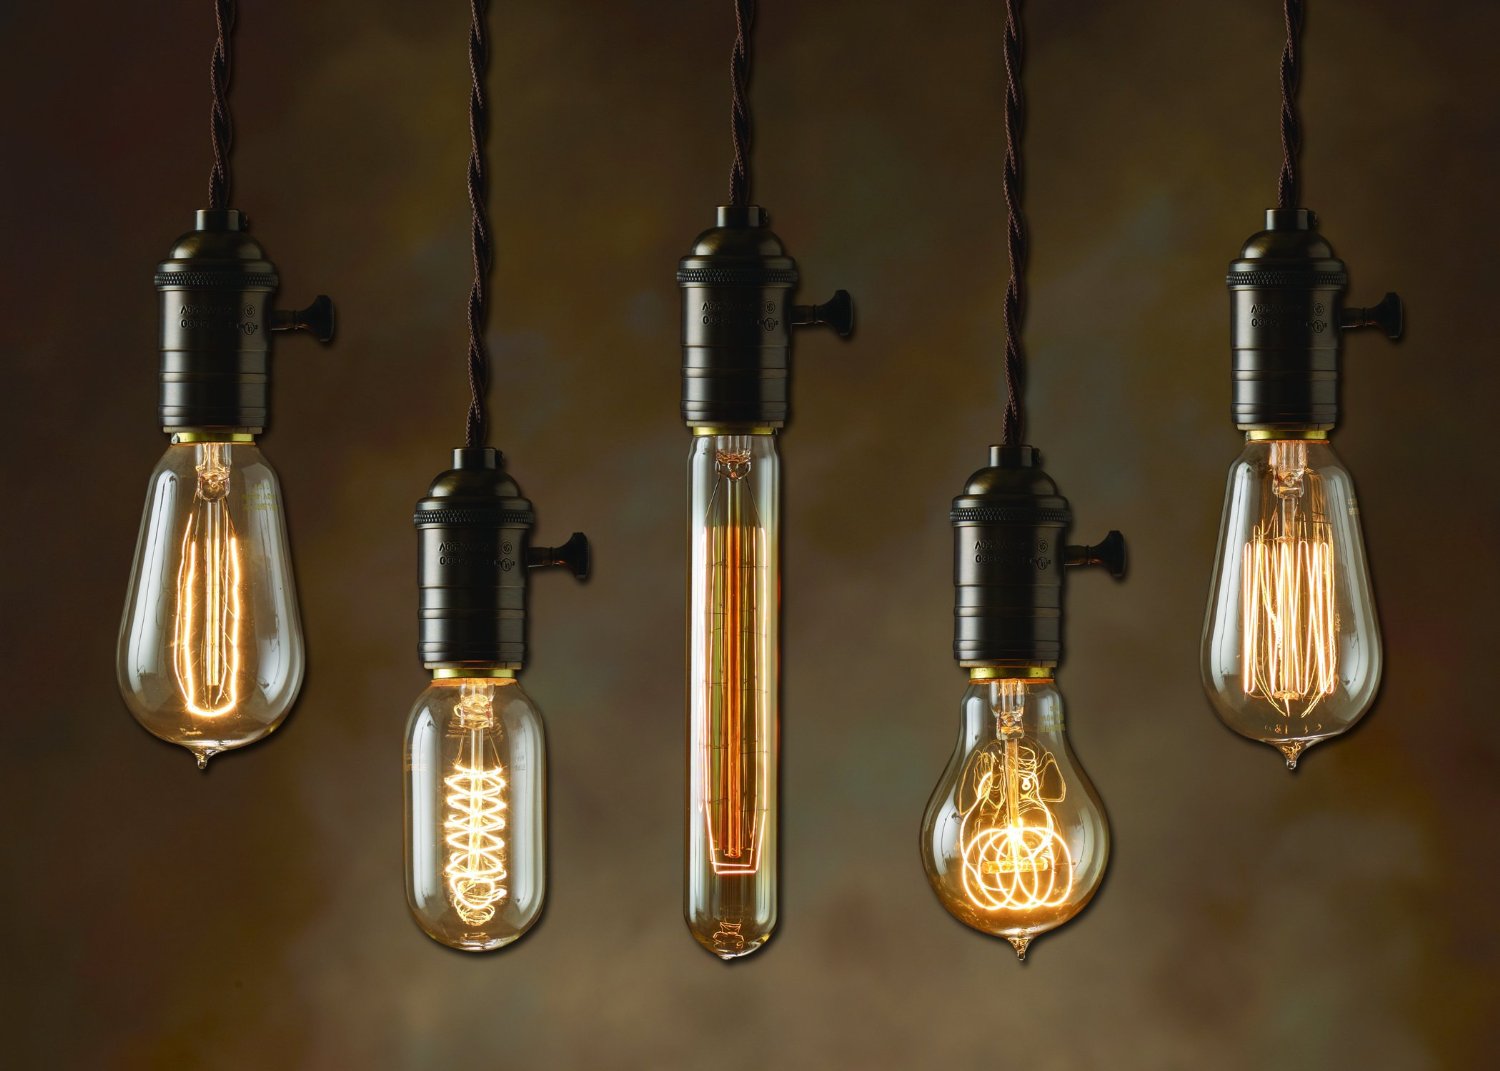 Decorate Your House With These Decor Trends and We’ll Guess Which Generation You’re from Edison bulbs